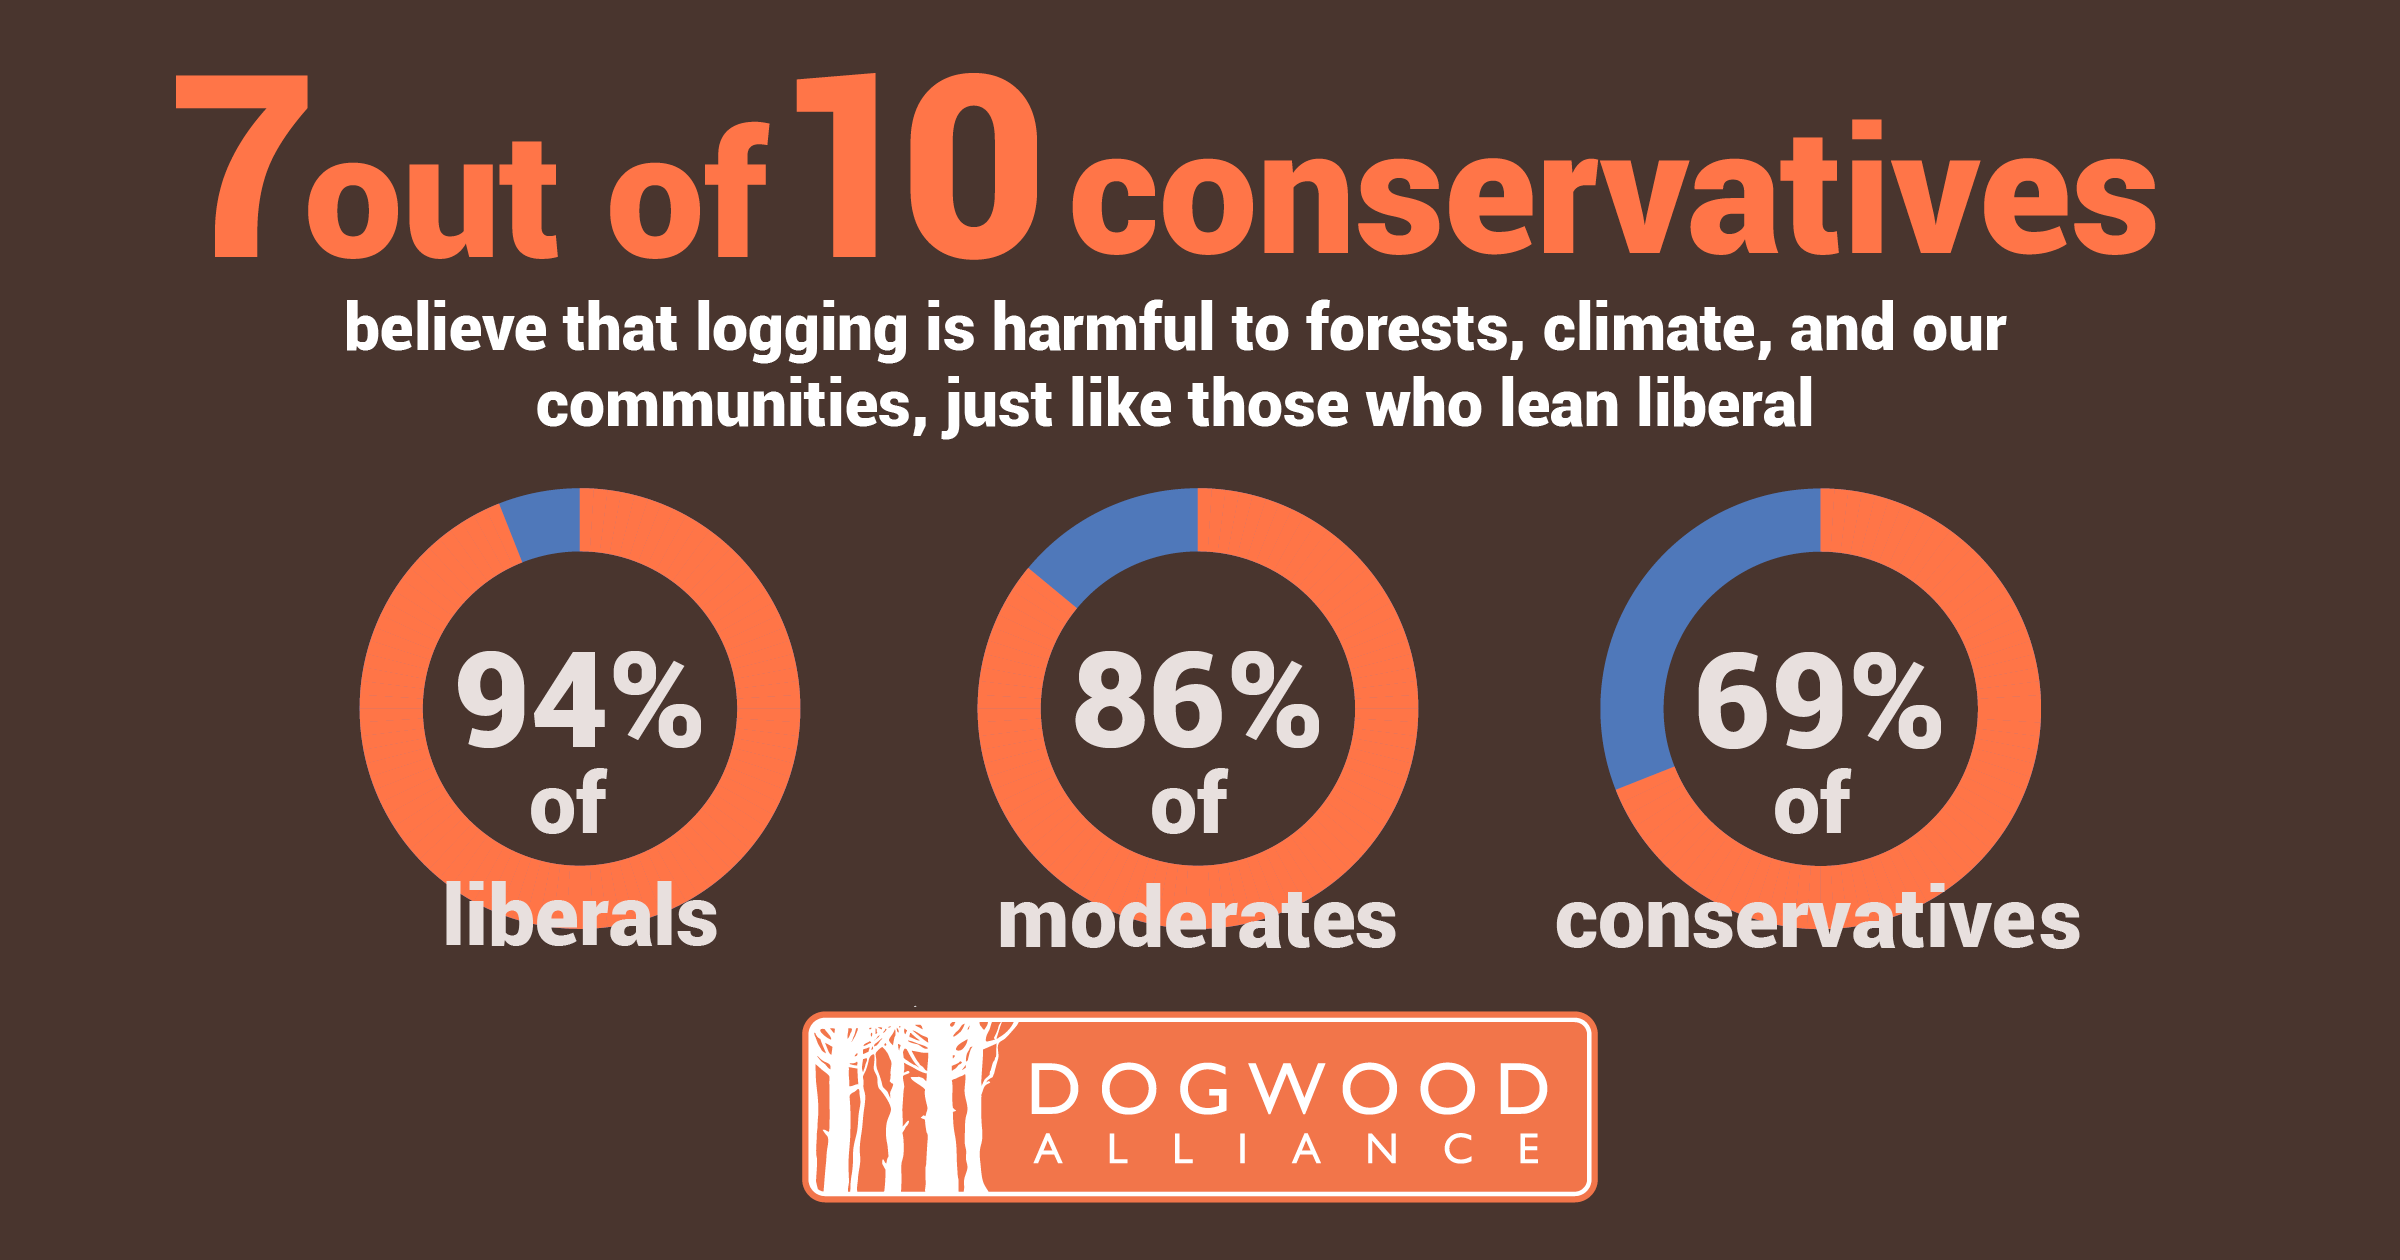 7 out of 10 conservatives believe that logging is harmful forests and the climate.